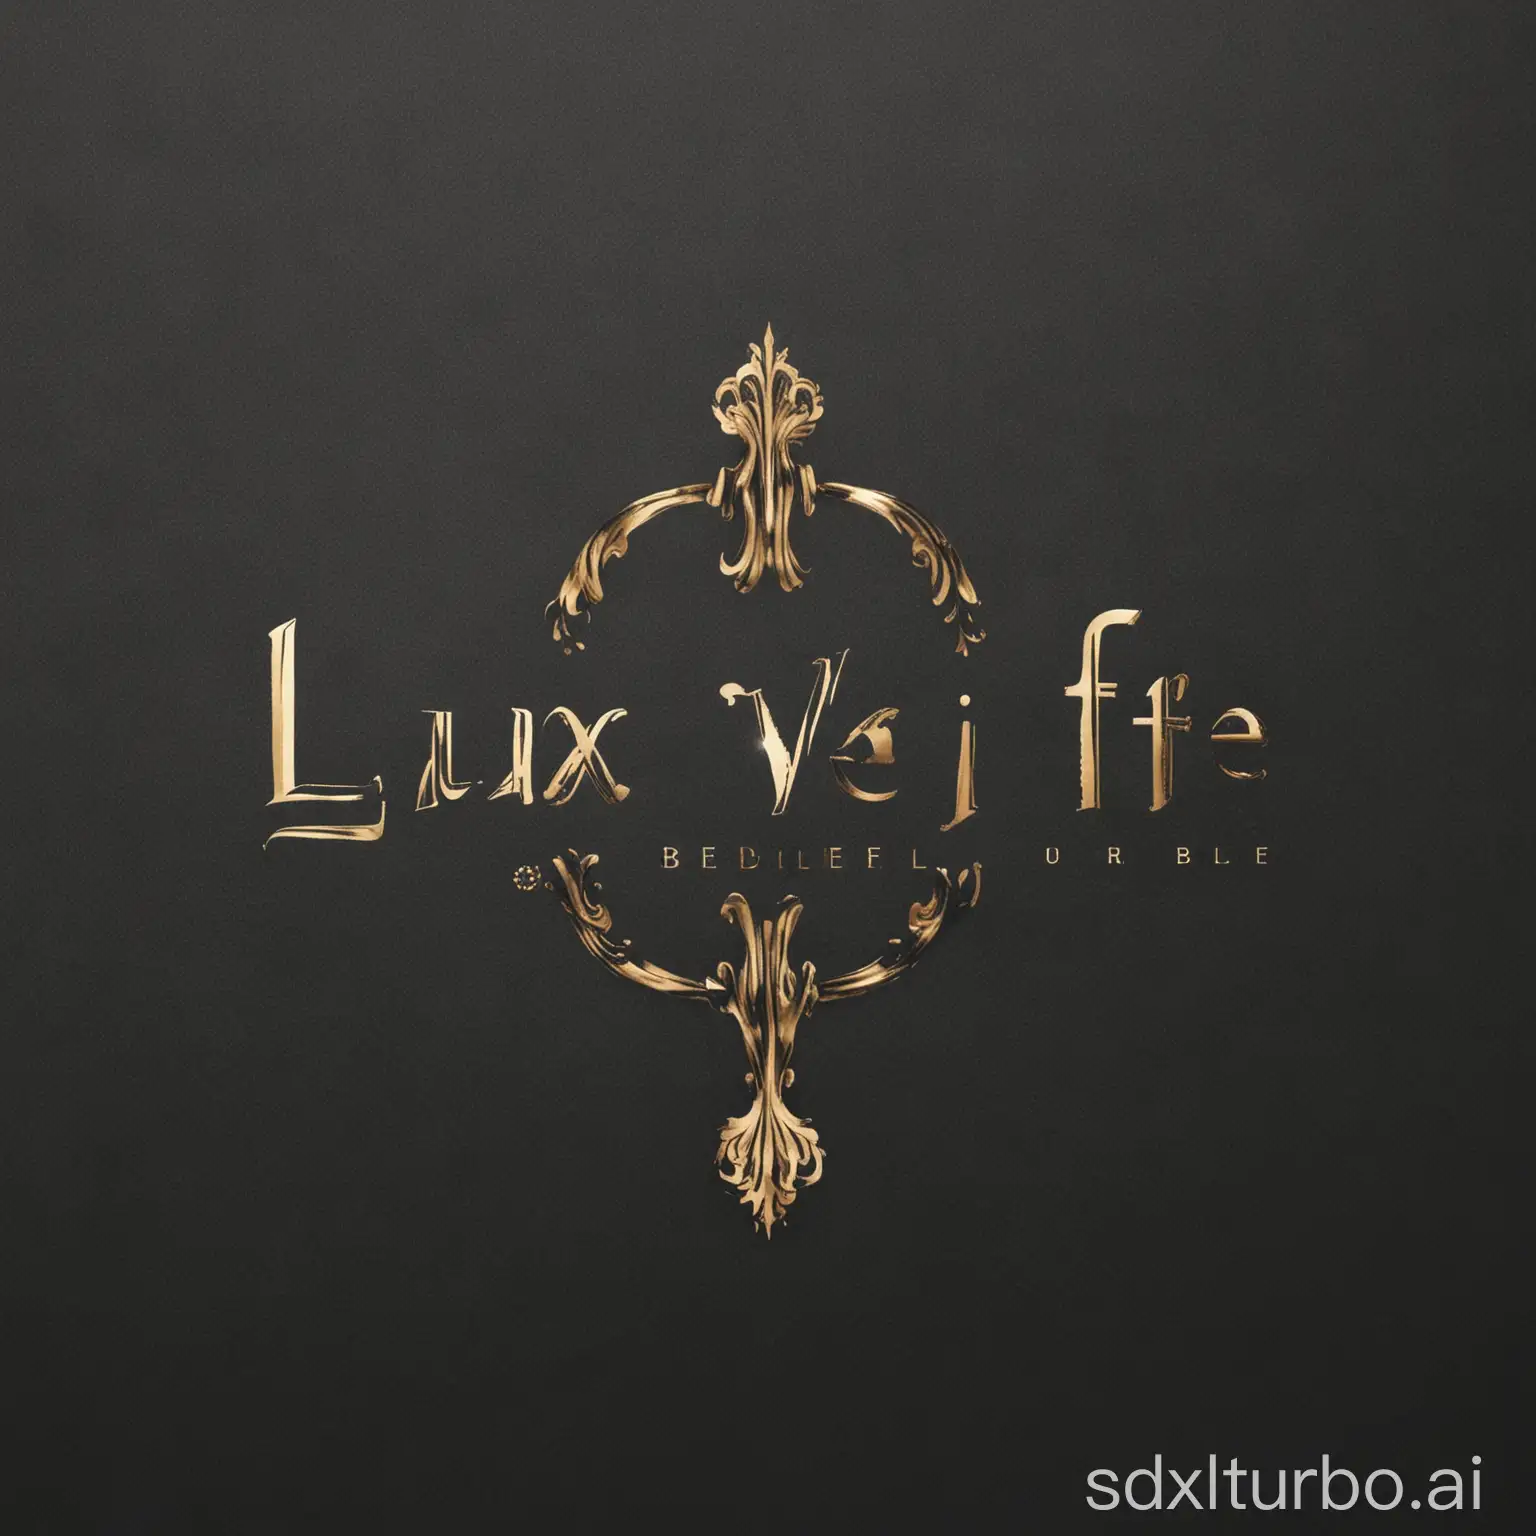 Create a luxurious and elegant logo for "LuxeVibeLife" that embodies a sophisticated lifestyle. Incorporate elements that evoke a sense of style, class, and vibrance to reflect a high-end living experience. Experiment with sleek fonts, sophisticated color palettes, and subtle design accents to convey a harmonious blend of luxury and contemporary living.